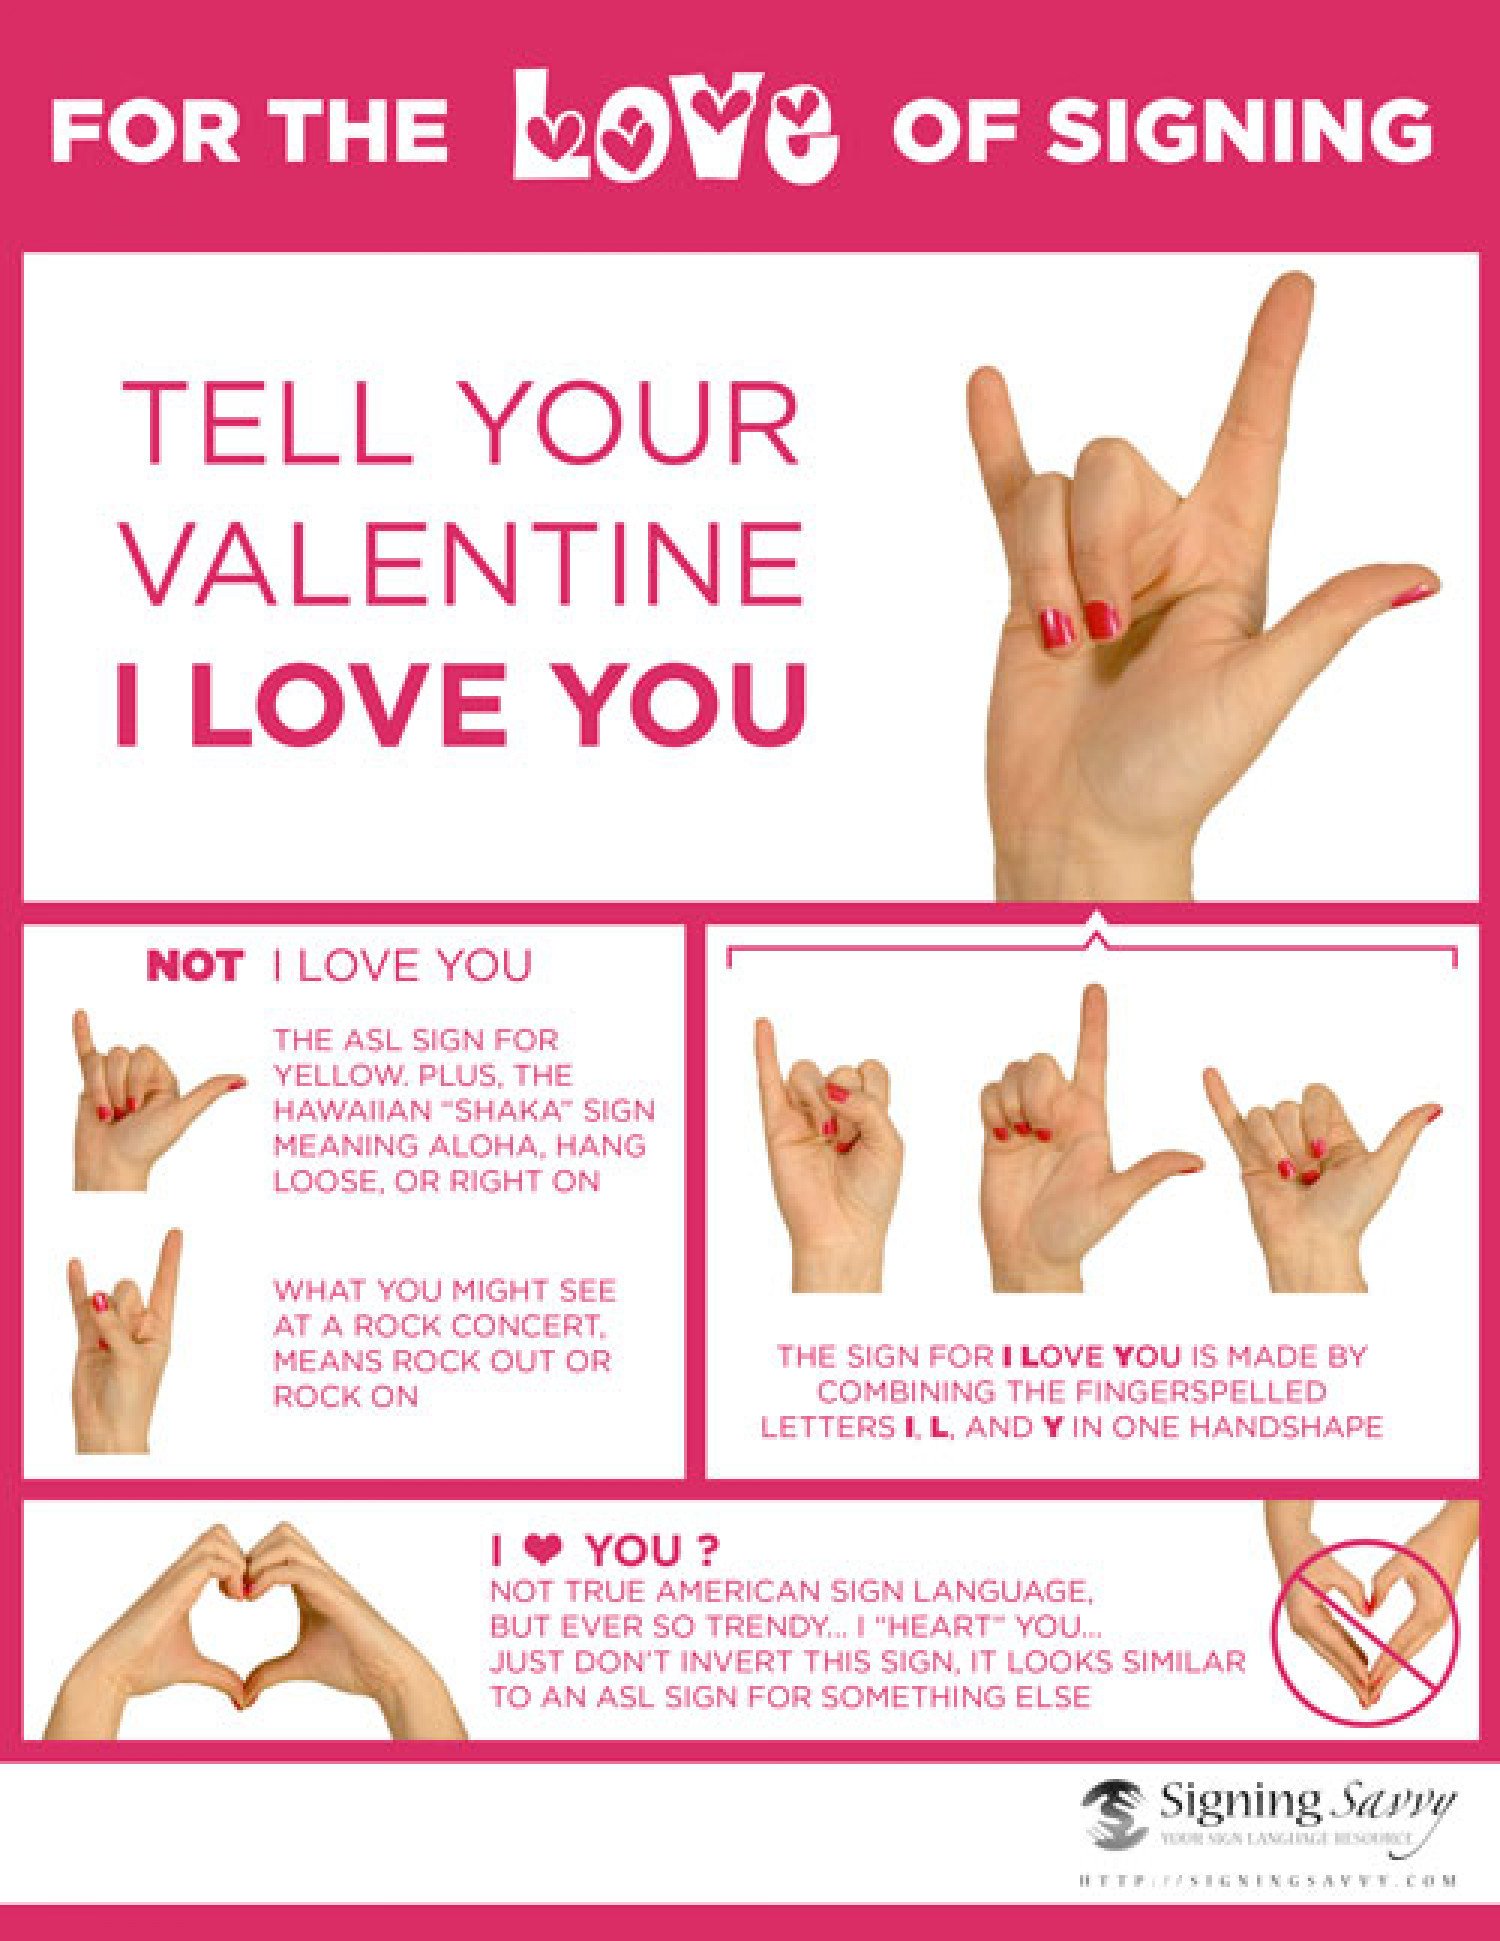 How Do You Say Love In Sign Language - HealthyHearingClub.net